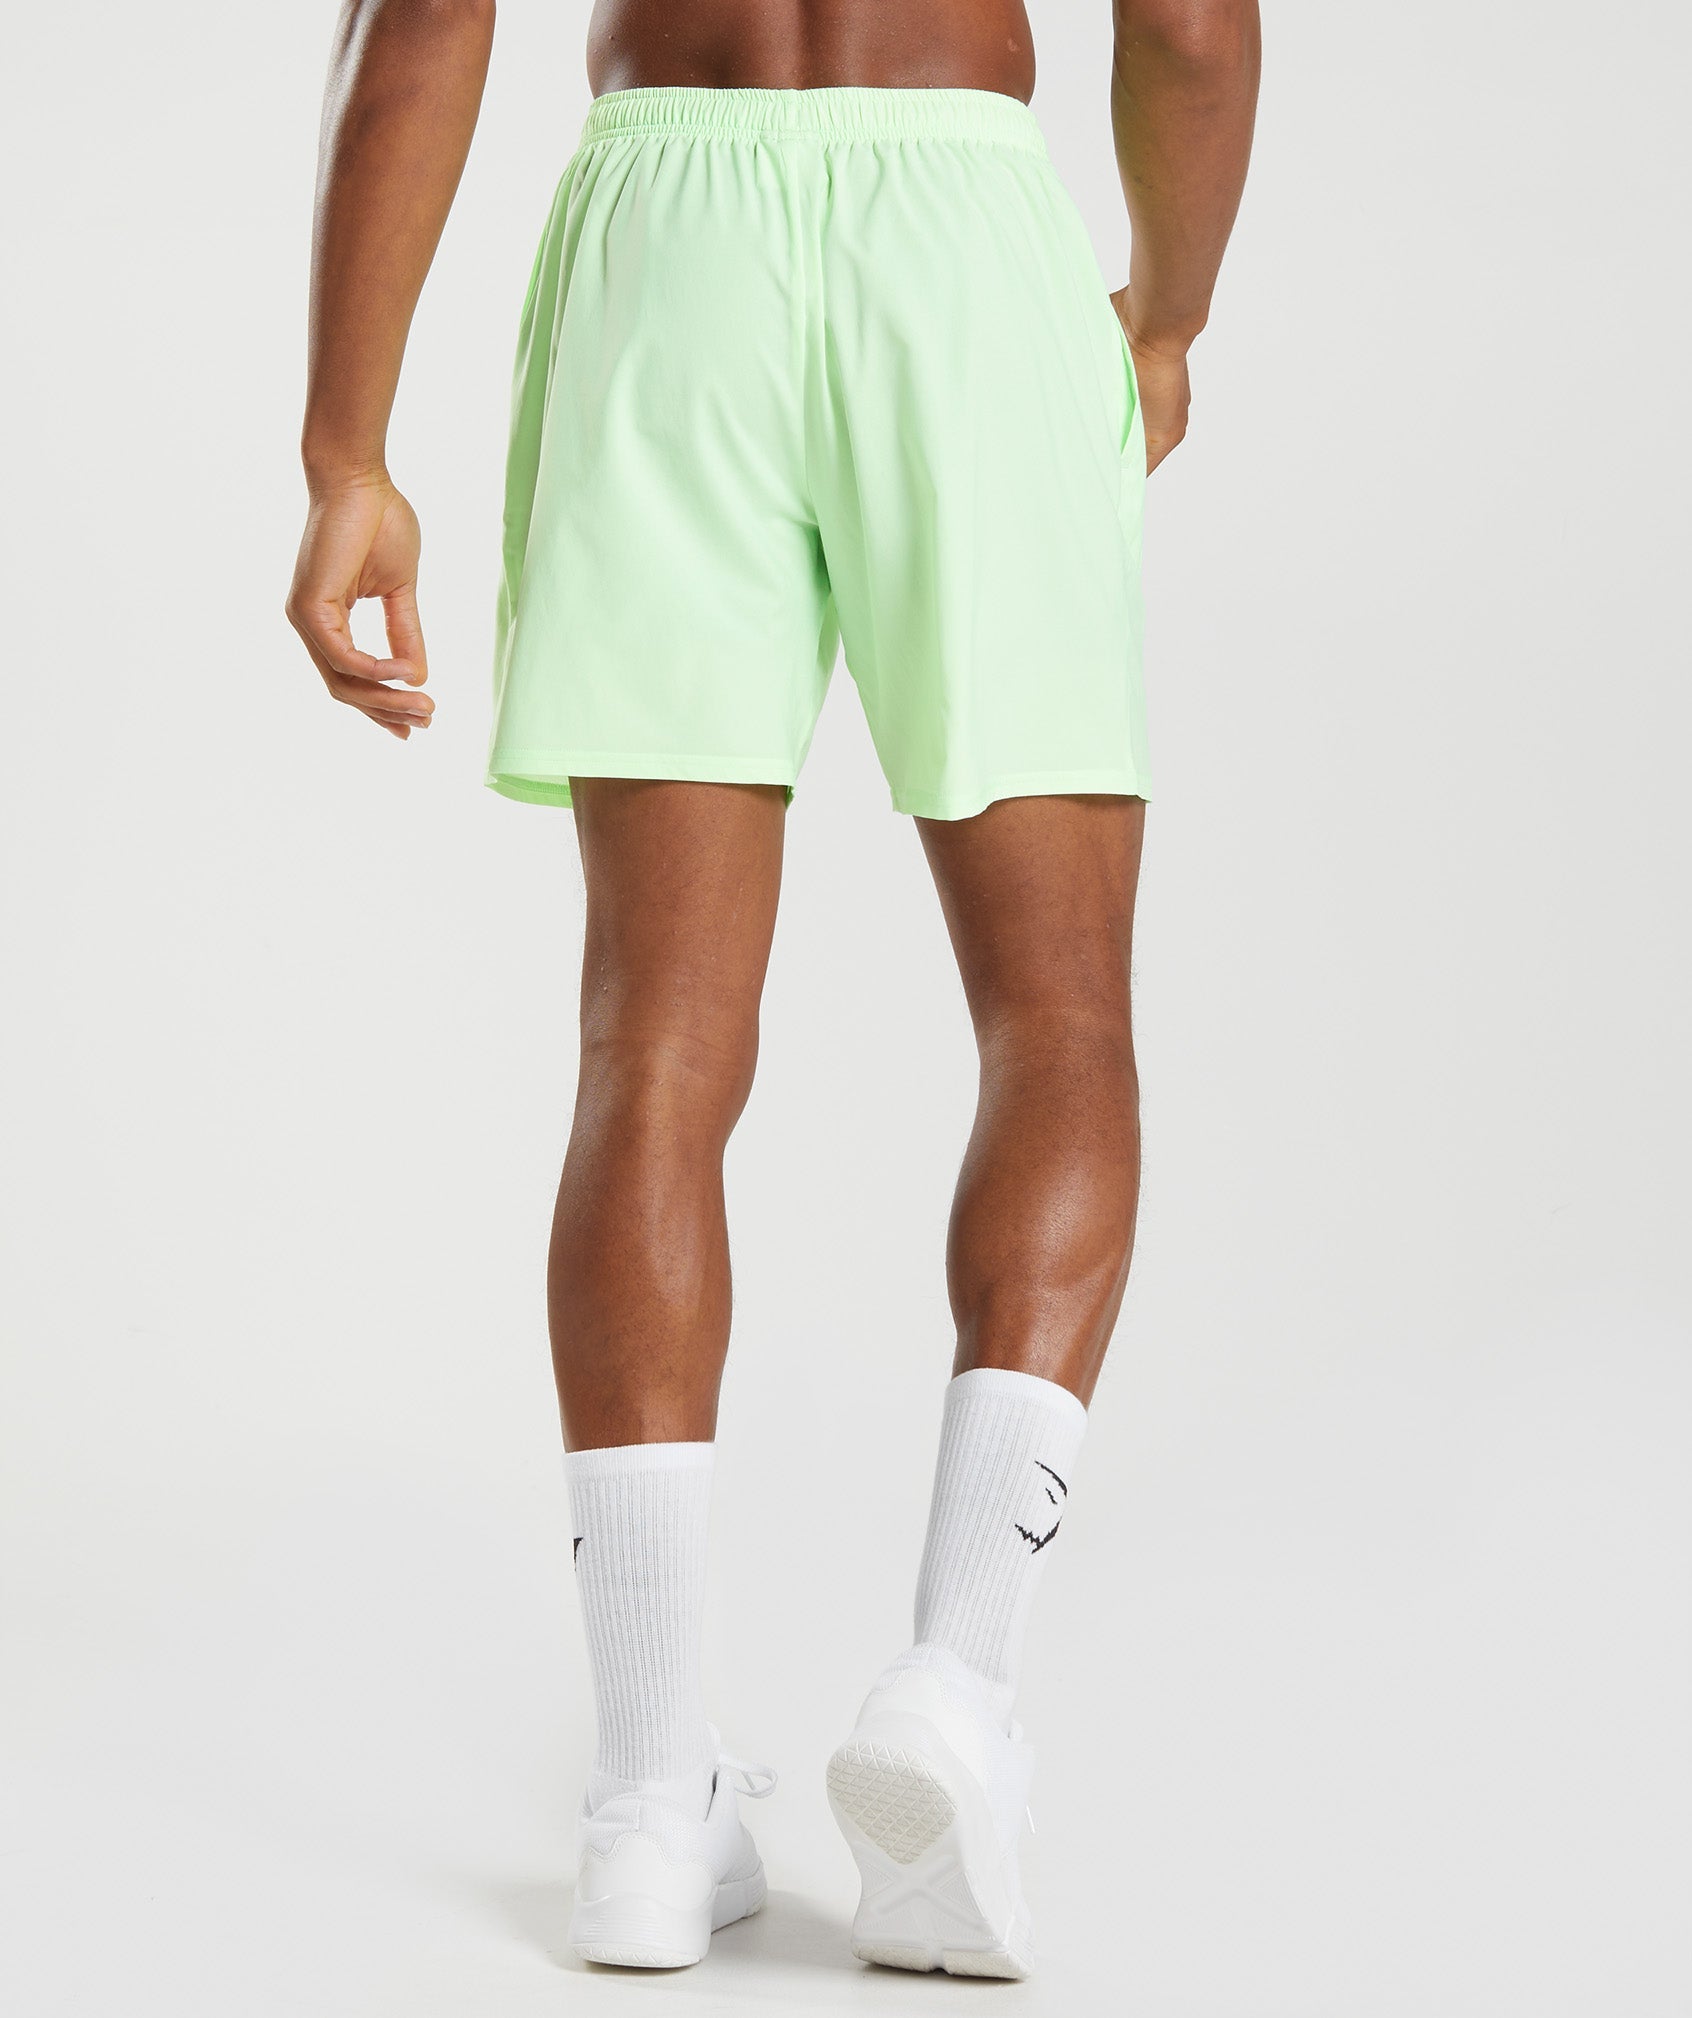 Arrival 7" Shorts in Fluo Mint